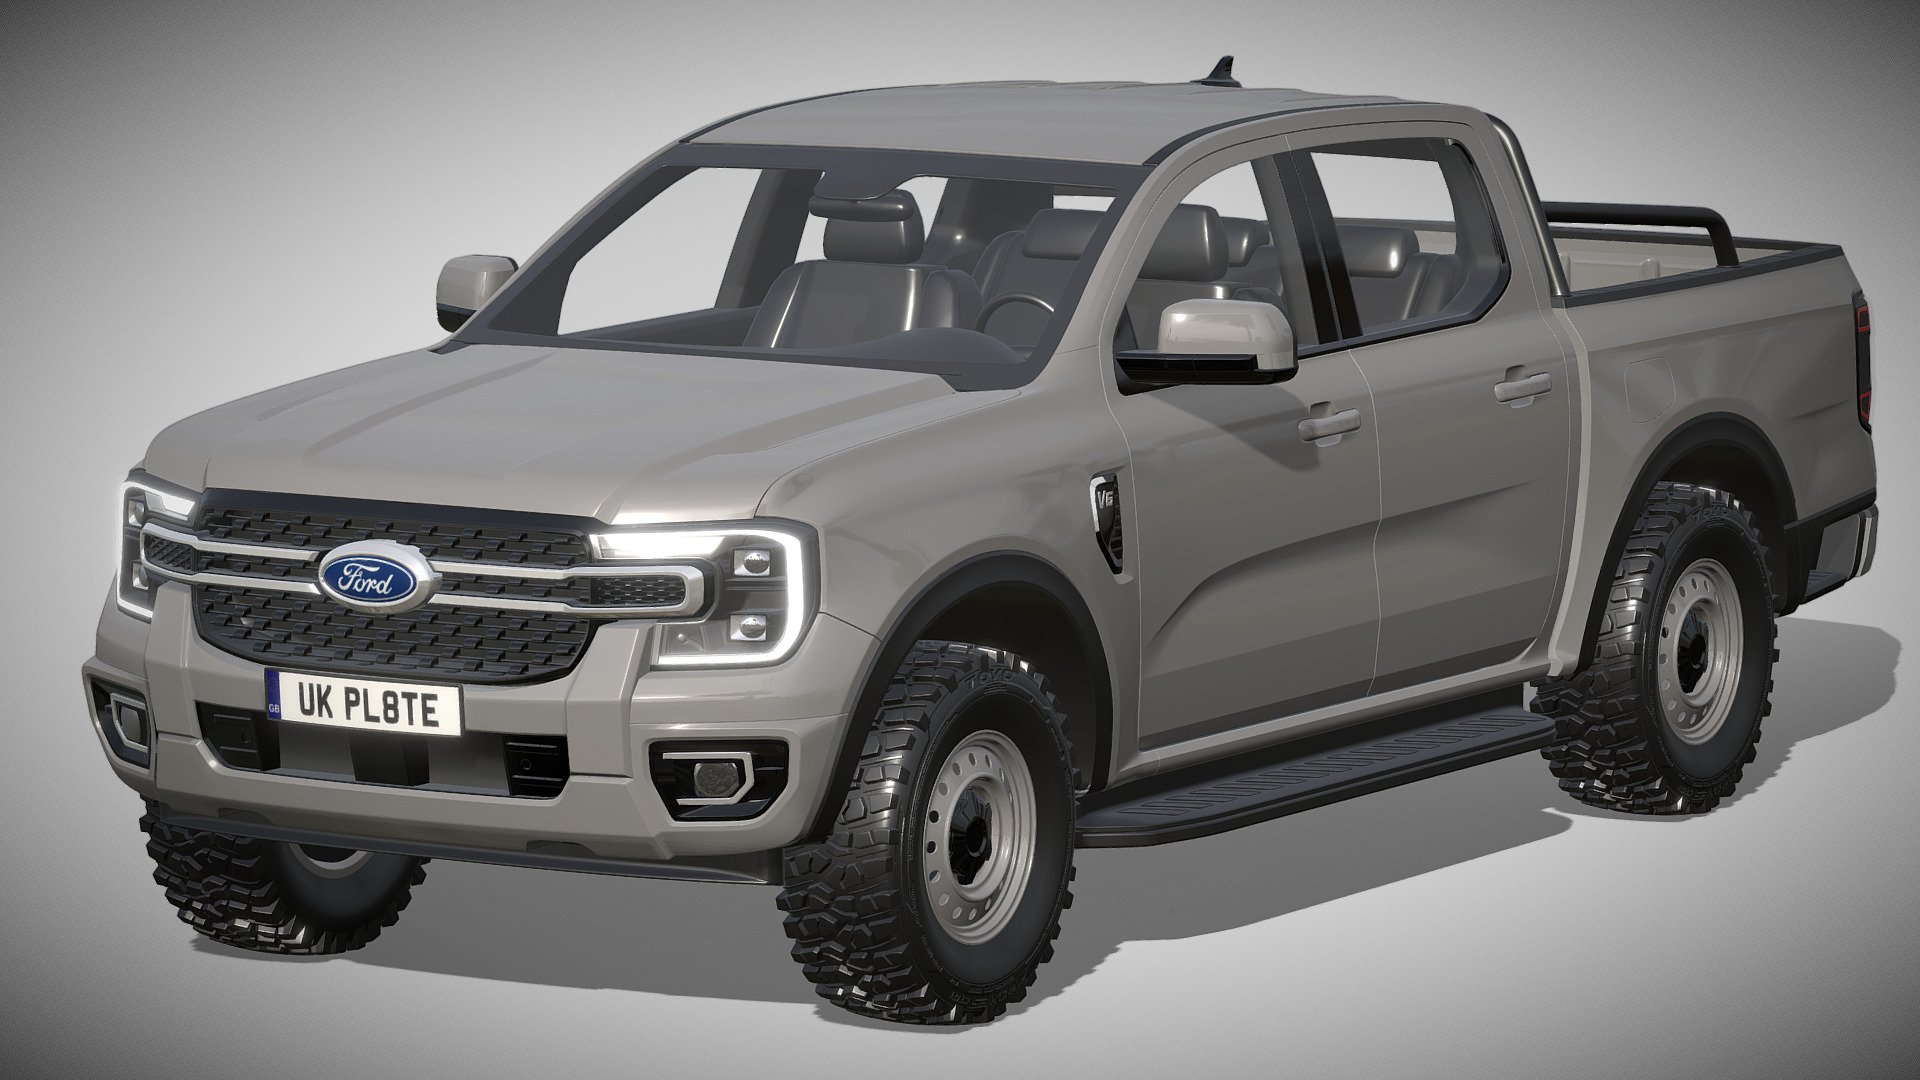 Ford Ranger XLT 2023

https://www.ford.com.au/showroom/future-vehicle/next-gen-ranger/xlt/

Clean geometry Light weight model, yet completely detailed for HI-Res renders. Use for movies, Advertisements or games

Corona render and materials

All textures include in *.rar files

Lighting setup is not included in the file! - Ford Ranger XLT 2023 - Buy Royalty Free 3D model by zifir3d 3d model